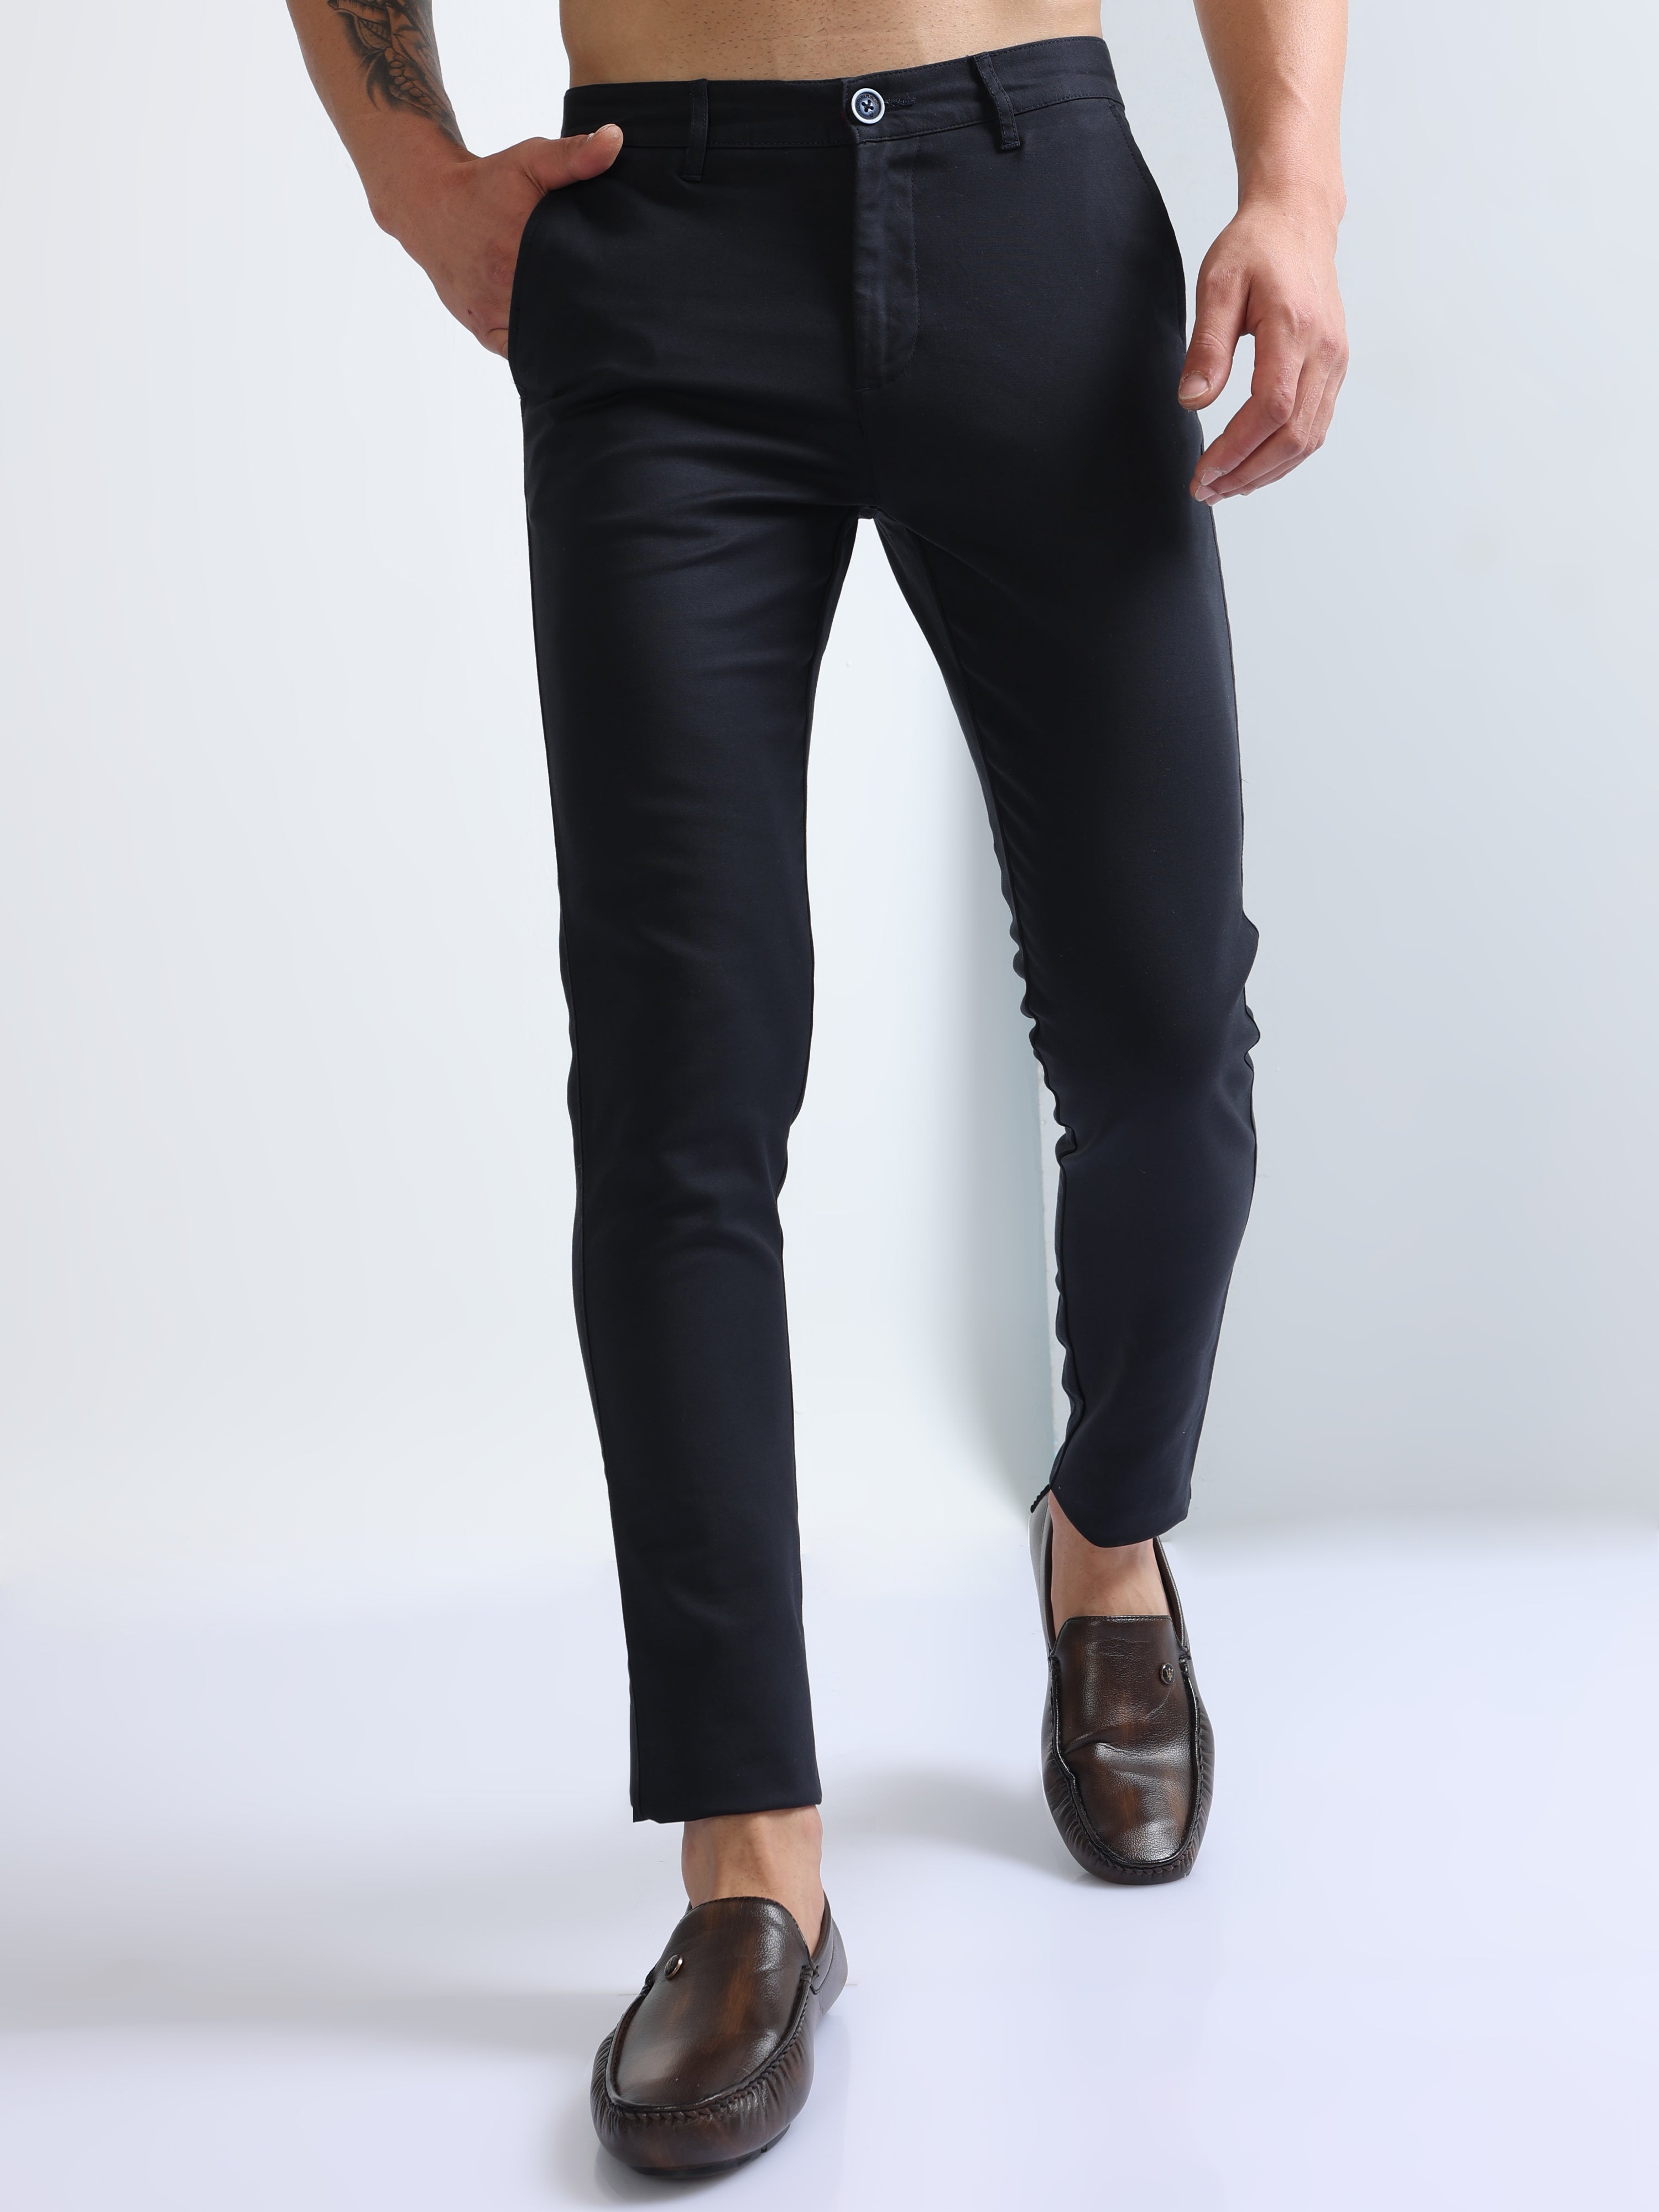 Buy TAGAS Women's Regular Trousers (TR-9009-BLACK- Black_XS) at Amazon.in